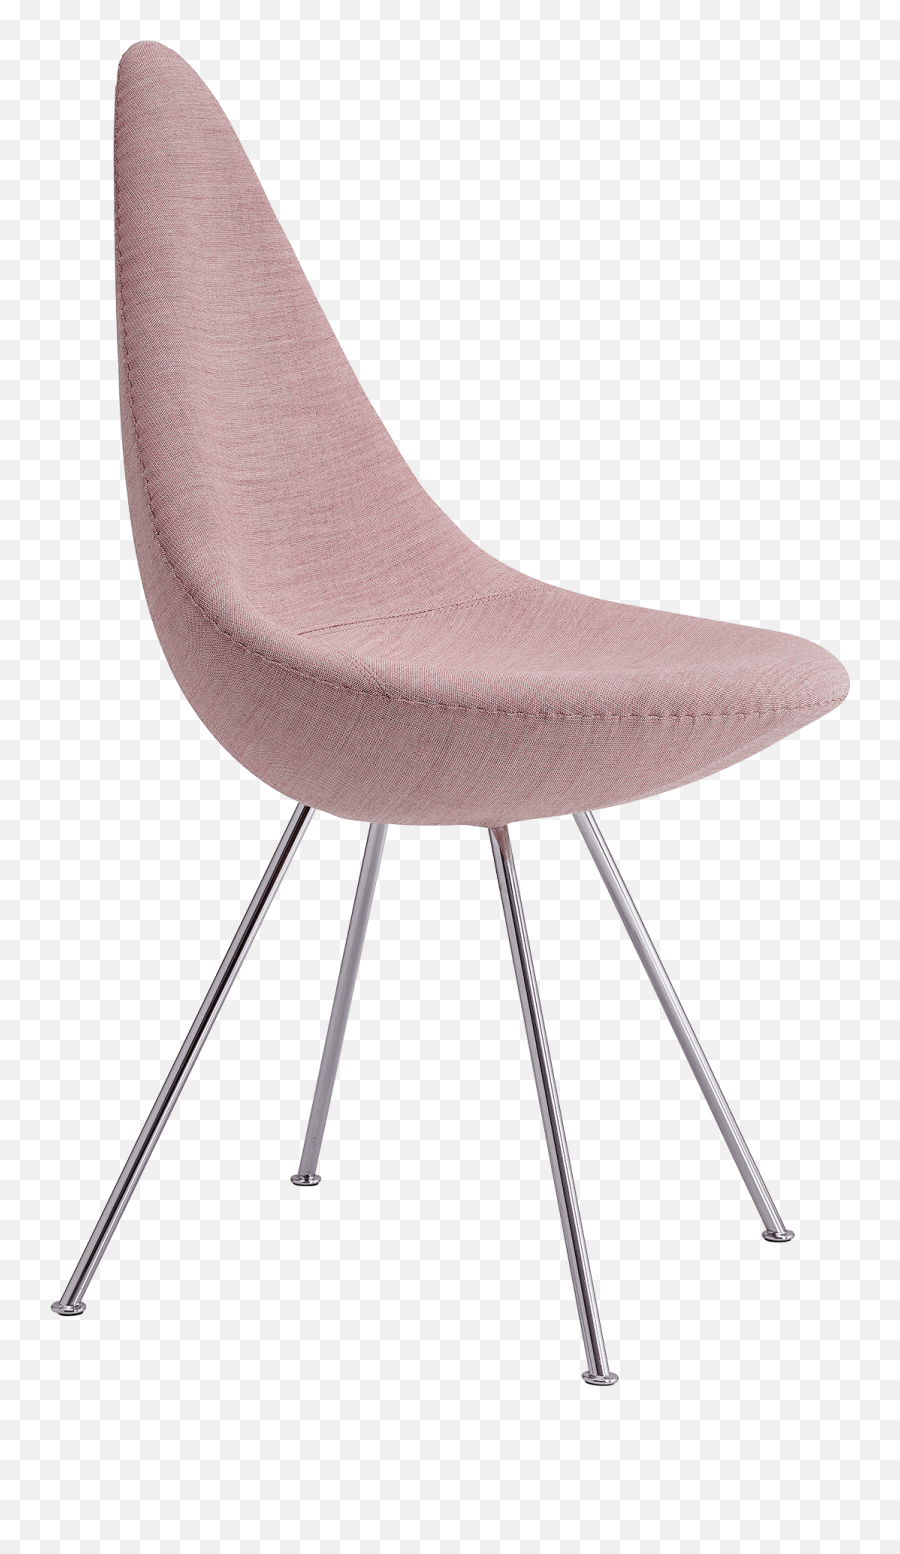 Drop Chair Fully Upholstered - Chaise Rose Poudré Et Bleu Png,Chairs Png